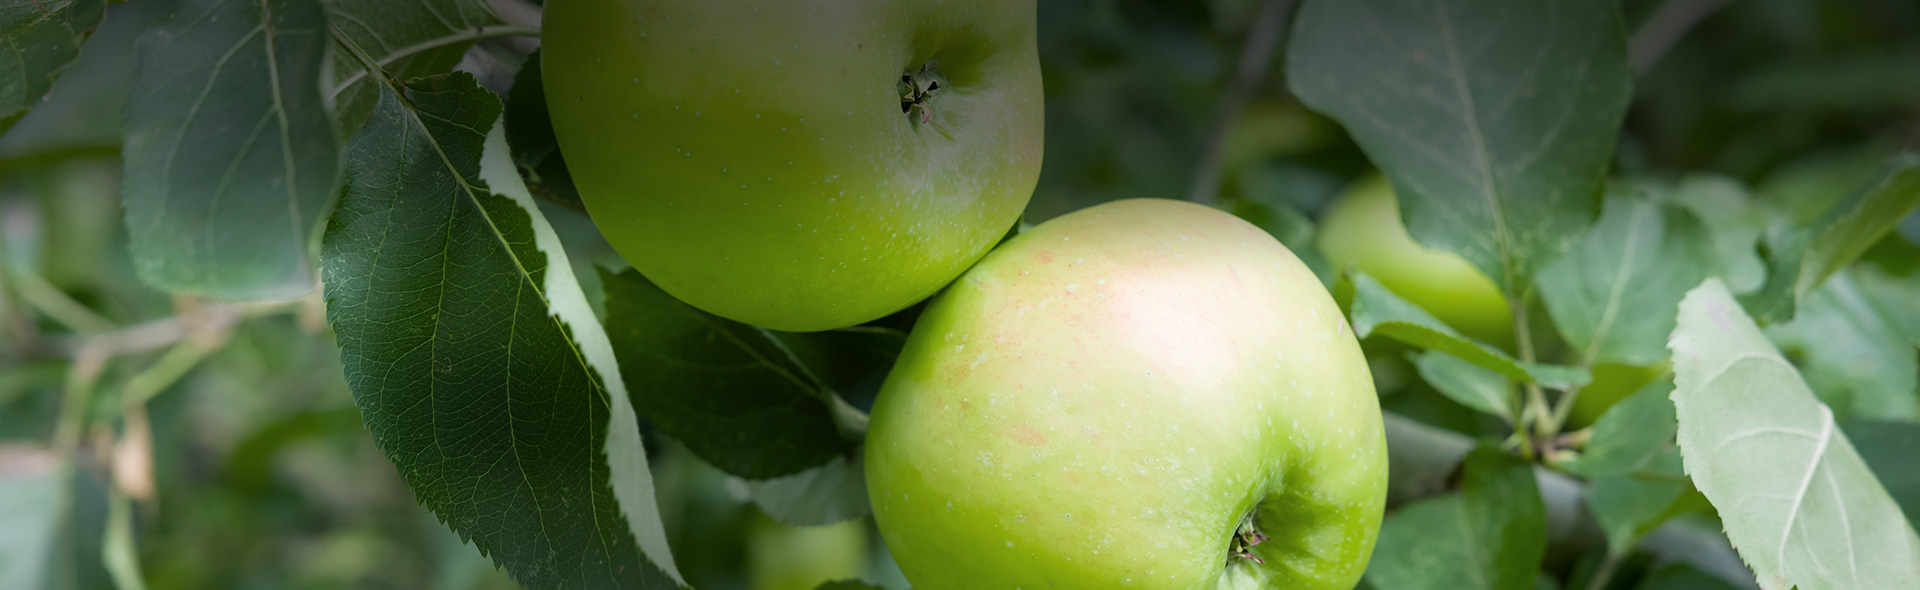 Agrii Crops Apples